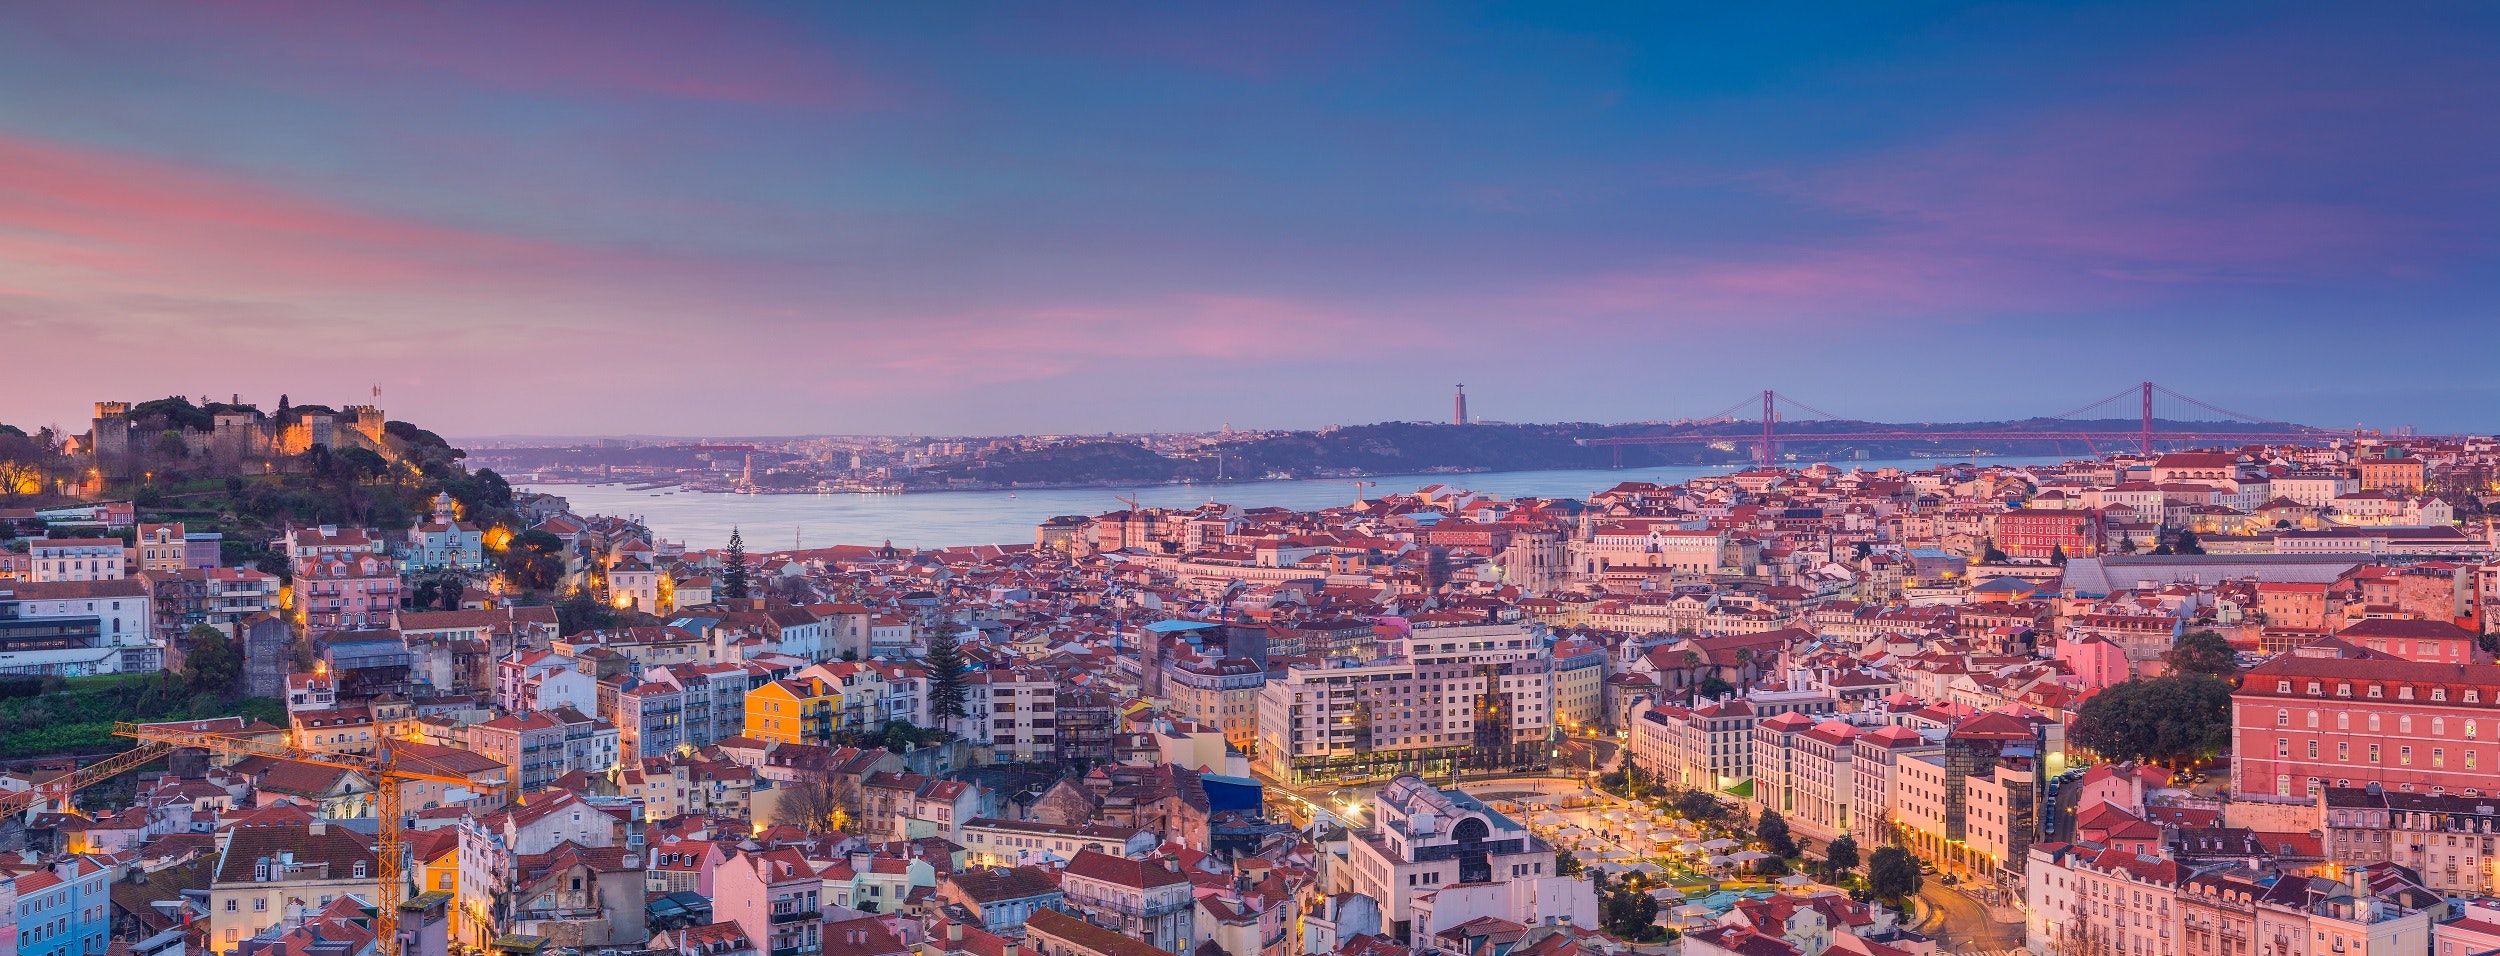 A spectacular view over the terracotta roofs of Lisbon sprawled over several hills